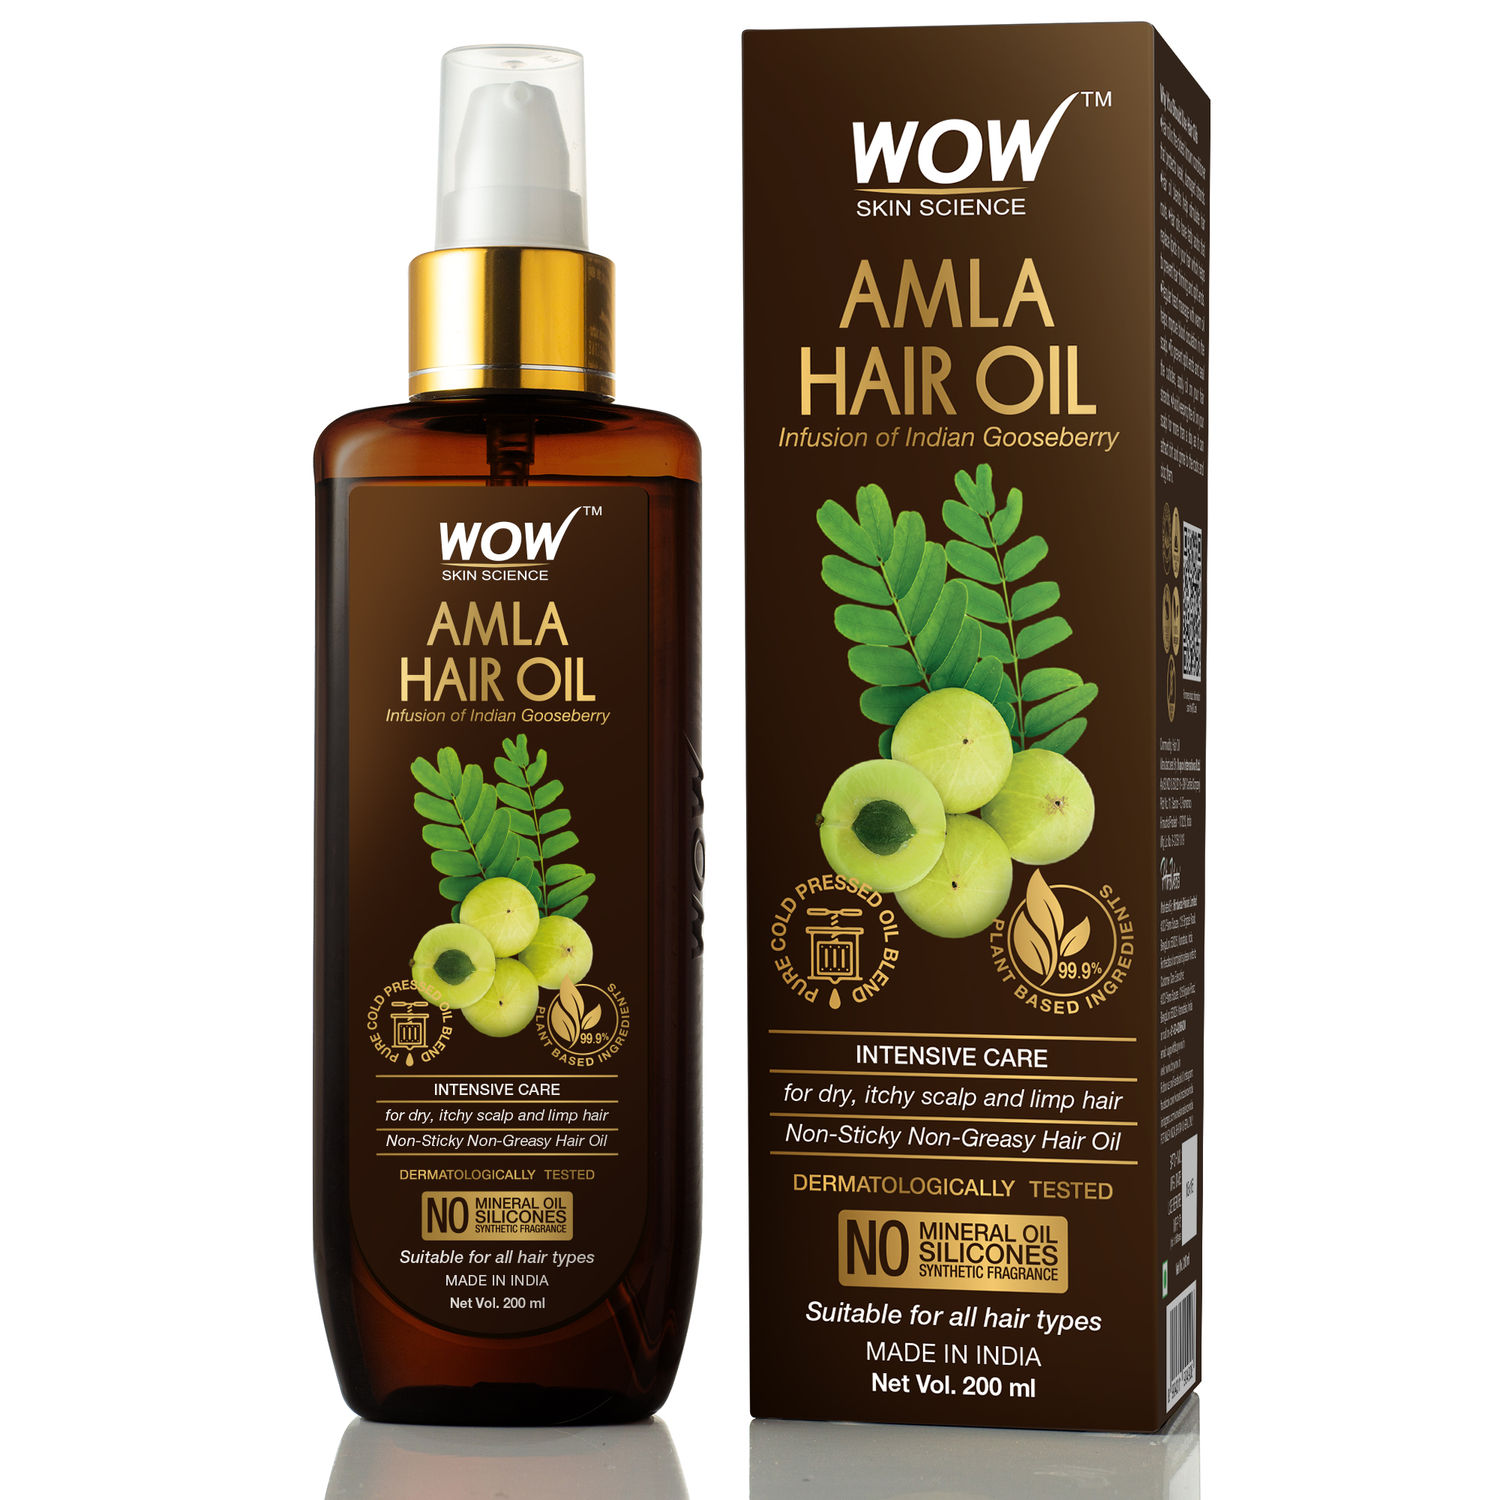 Buy WOW Skin Science Amla Hair Oil - Pure Cold Pressed Indian Gooseberry Oil - Intensive Hair Care - Non-Sticky & Non-Greasy - No Mineral Oil, Silicones, Synthetic Fragrance - 200mL - Purplle